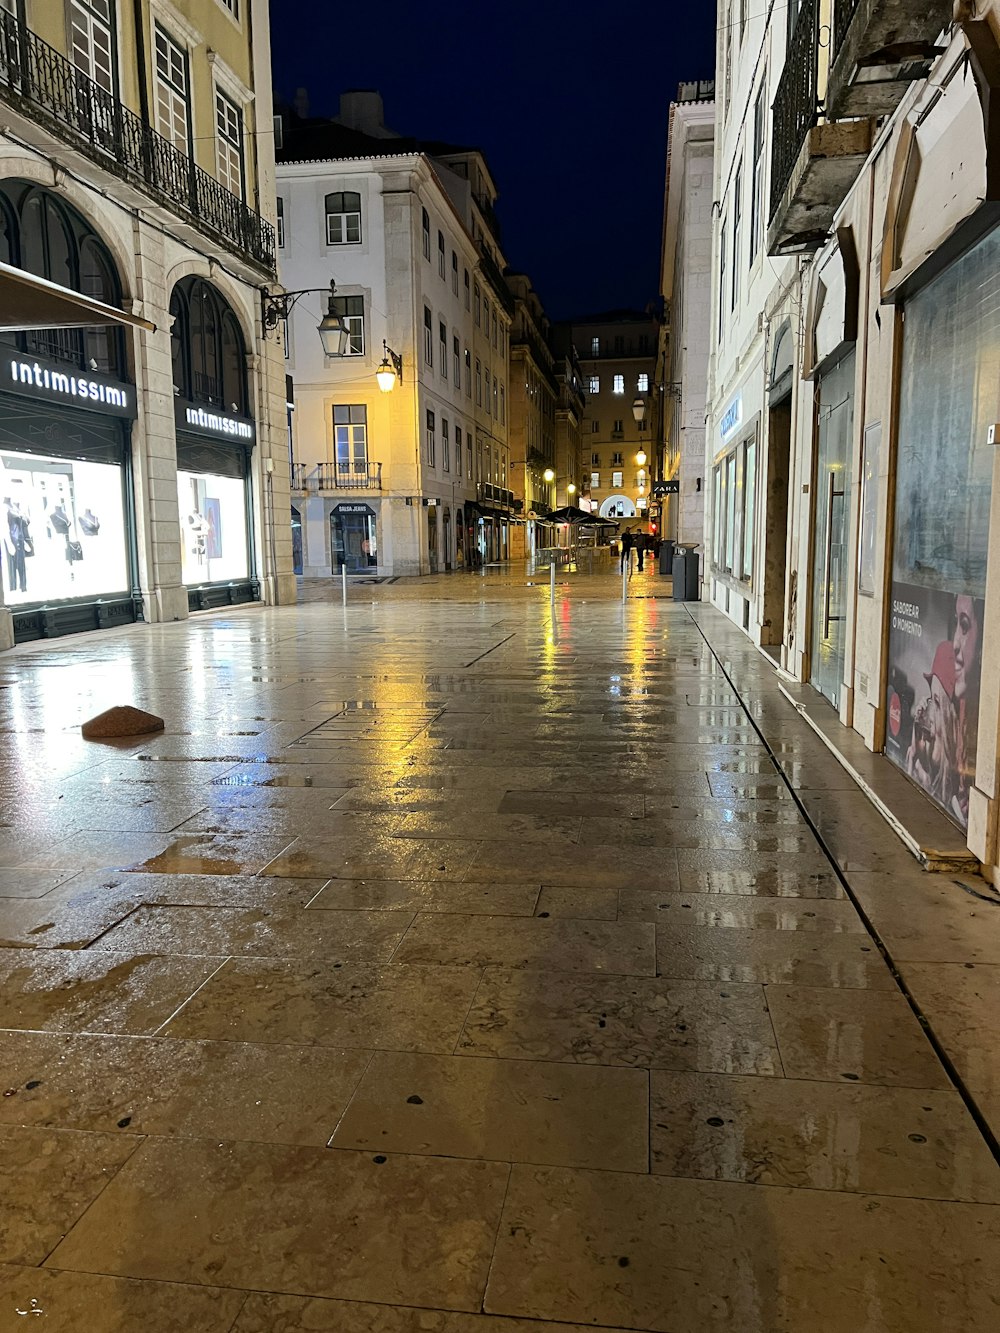 a wet sidewalk in a city at night